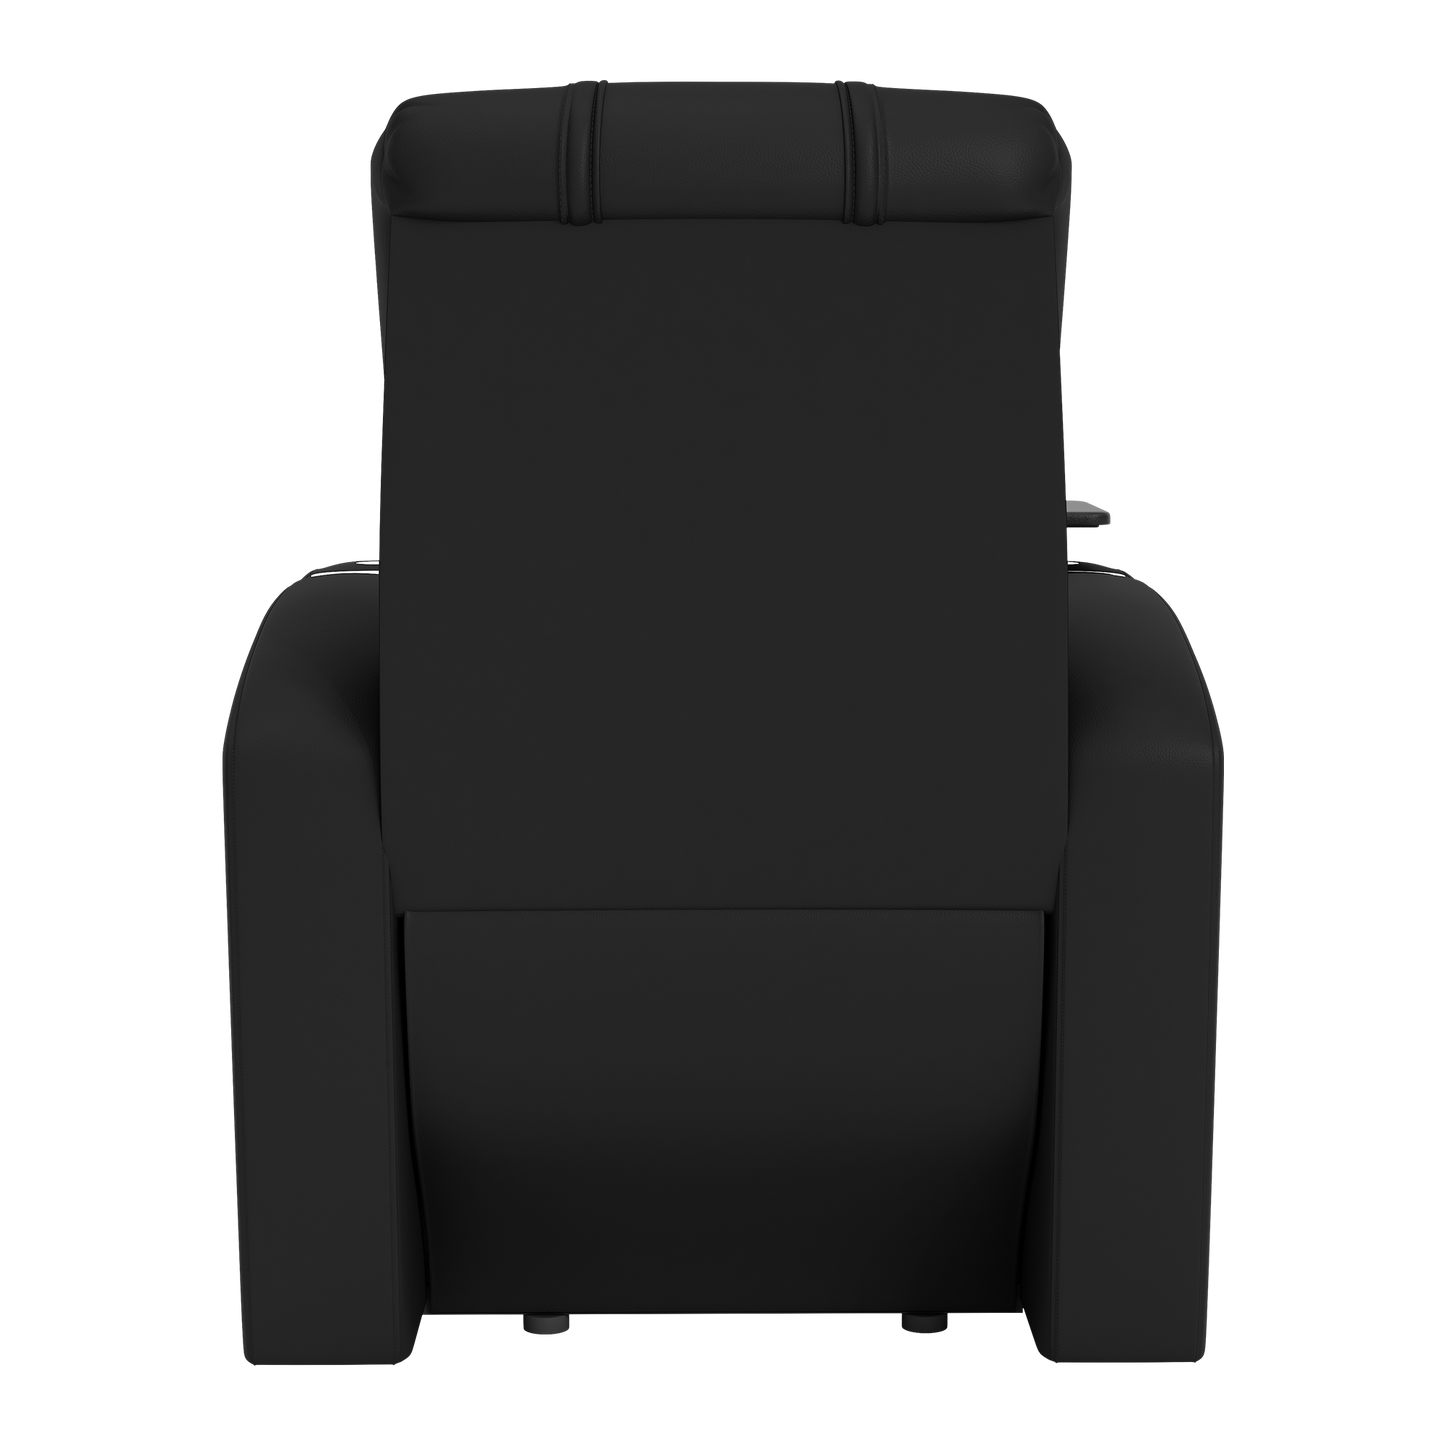 Stealth Power Plus Recliner with Seattle Mariners Secondary